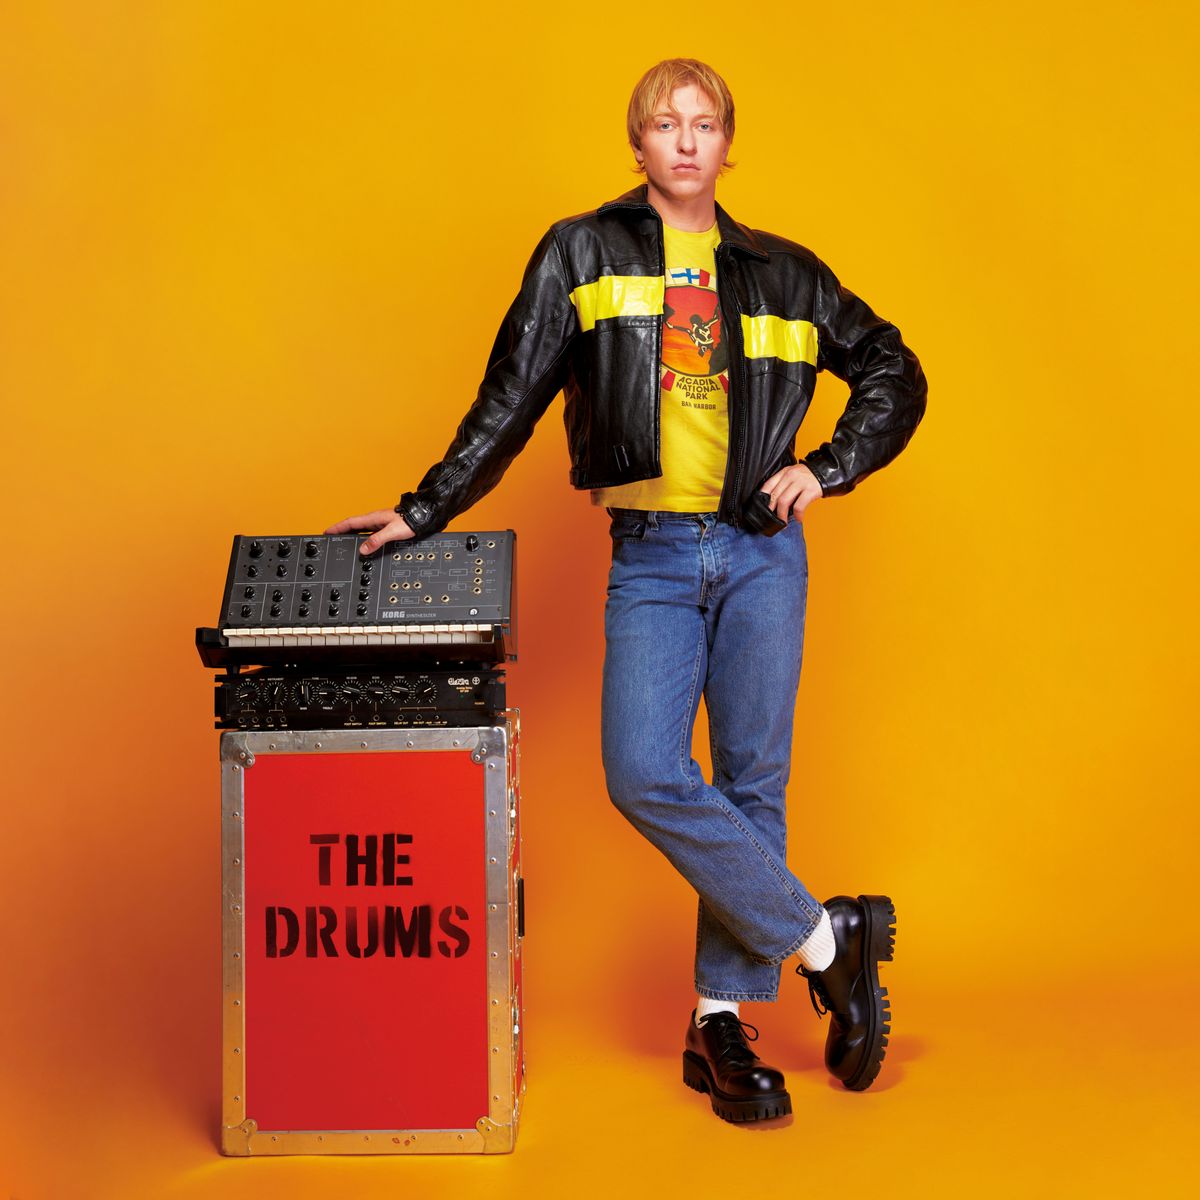 The Drums' Jonny Pierce on the Past, Facing Childhood Trauma, and the Essence of Vulnerability